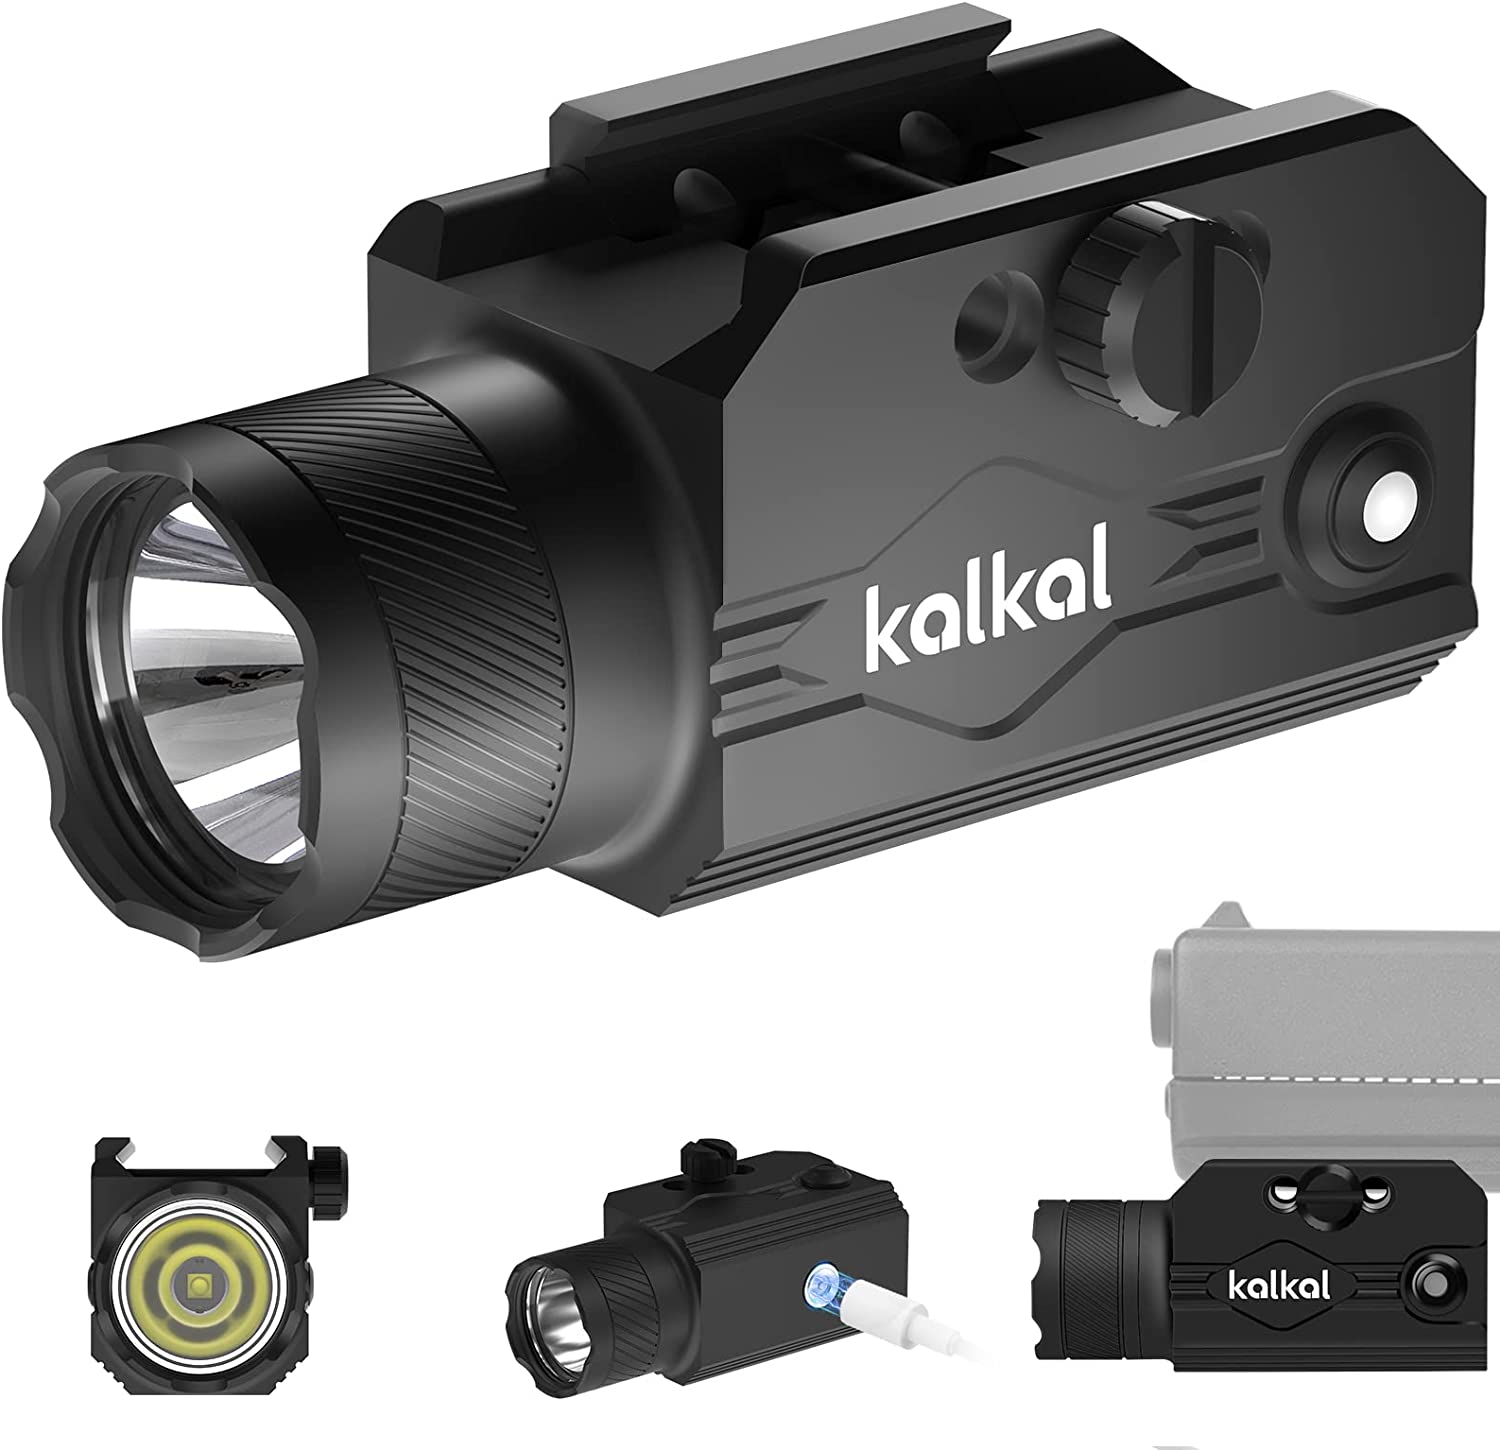 Kalkal Gun Light, 1200 Lumens Pistol Light with 21mm Rail, Magnetic Rechargeable Tactical Gun Flashlights for Pistols, Compact Weapon Light with Strobe for Glock SIG and Rifles